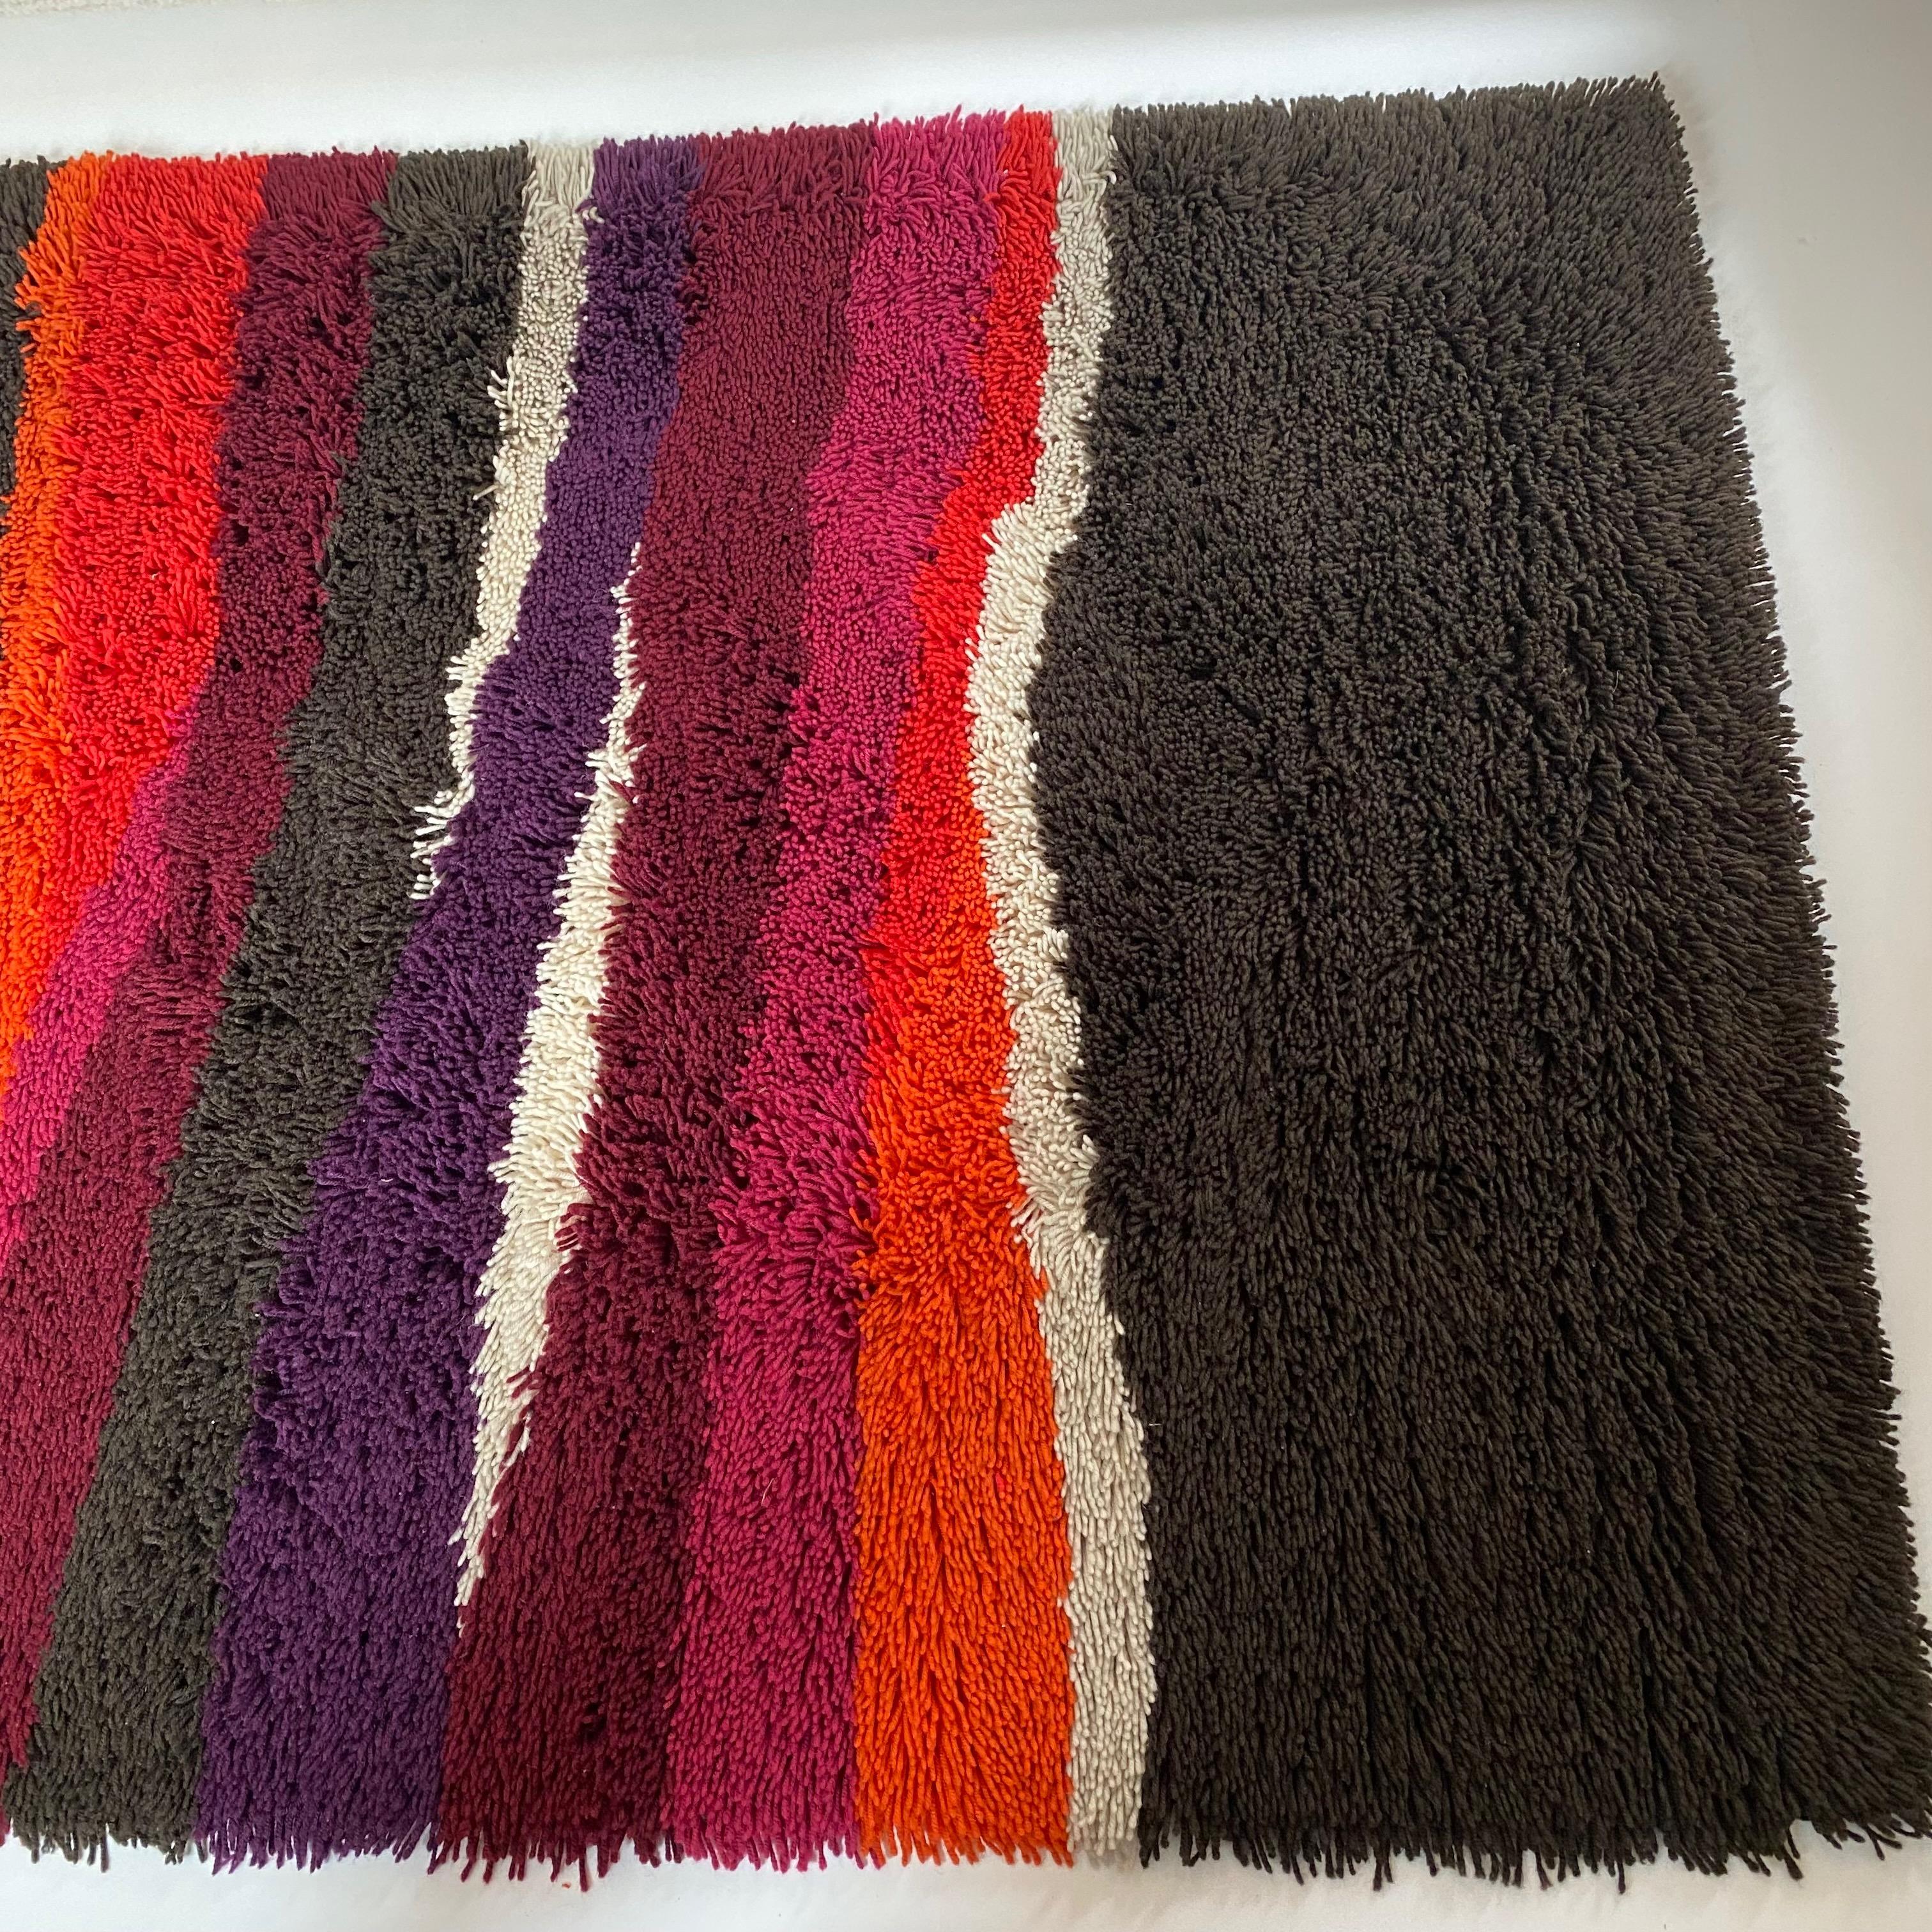 20th Century Vintage Colorful Stripes Panton Style High Pile Rug by Desso, Netherlands, 1970 For Sale